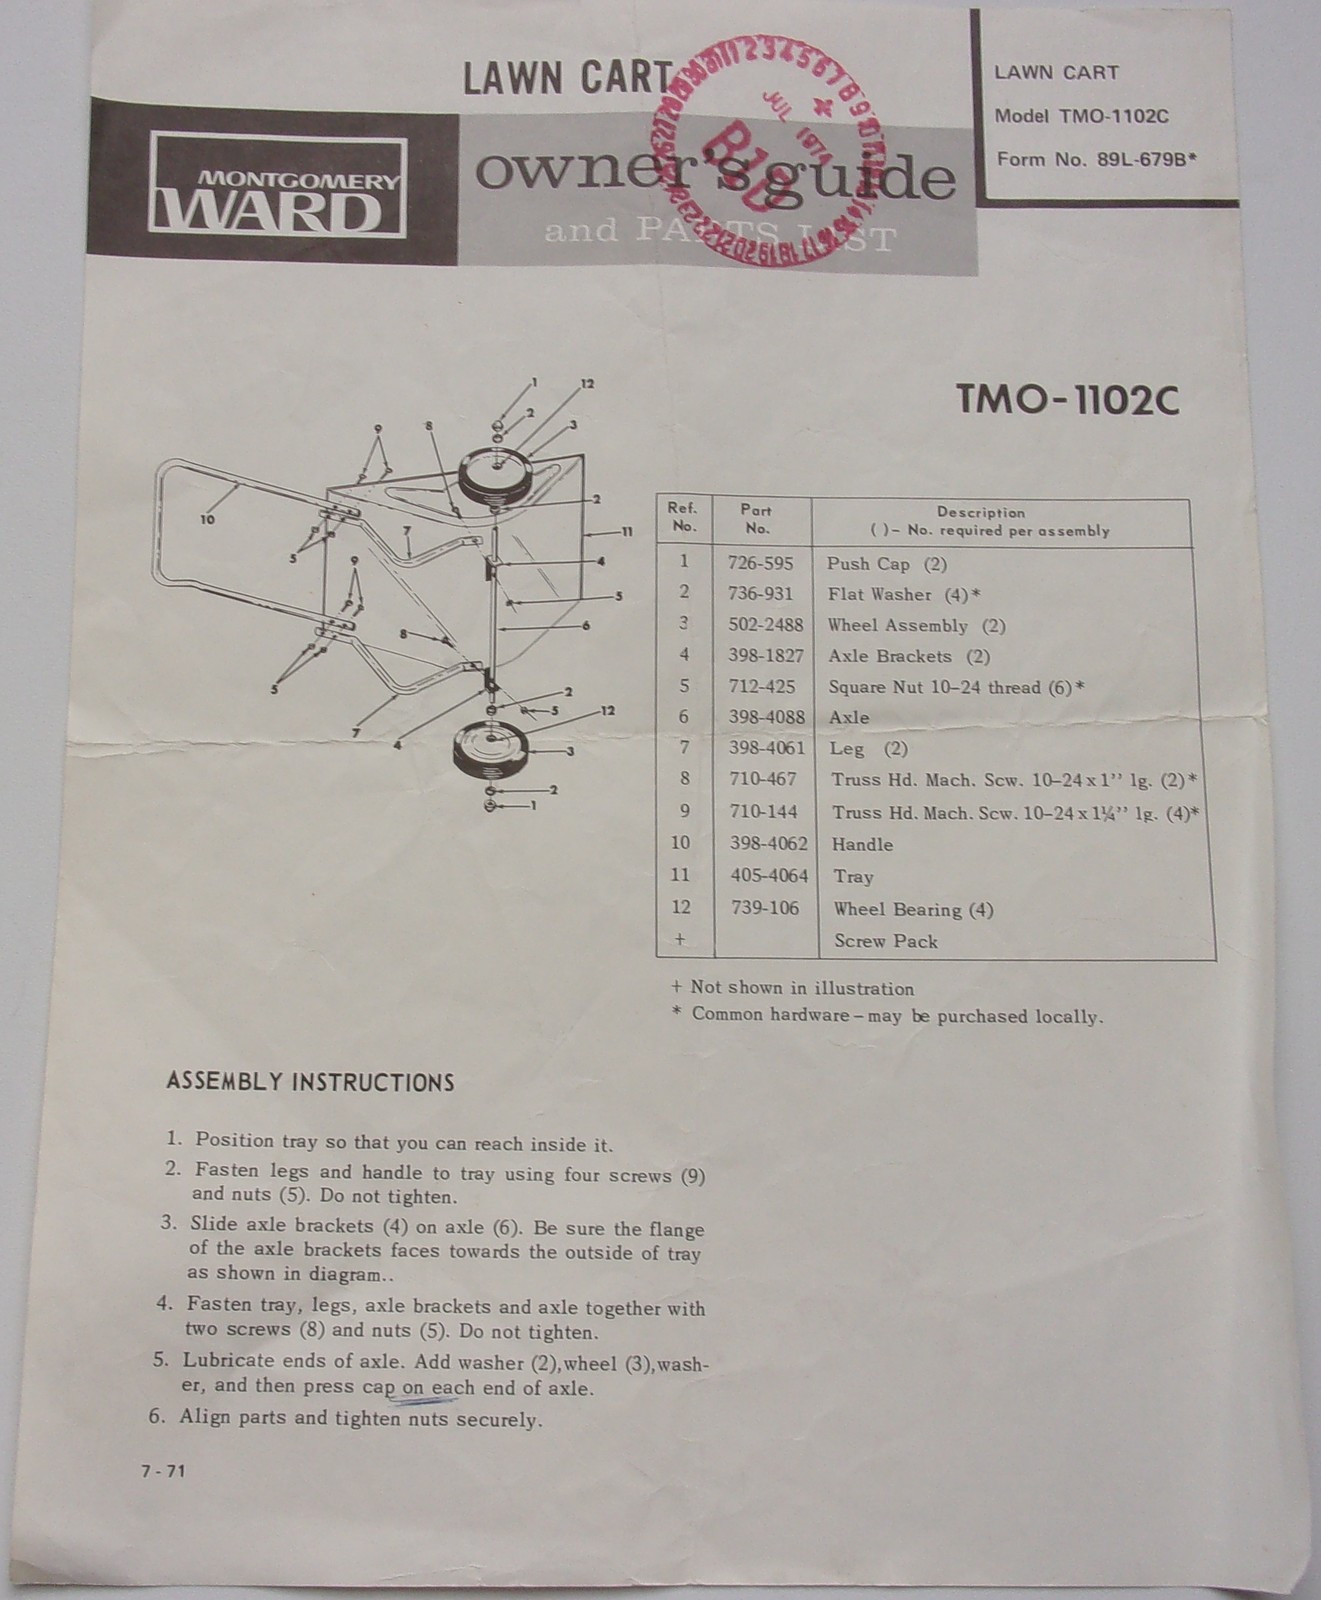 Vintage Montgomery Ward Lawn Cart Model TMO 1102c Owner’s Guide  Parts List 1974 - $2.99